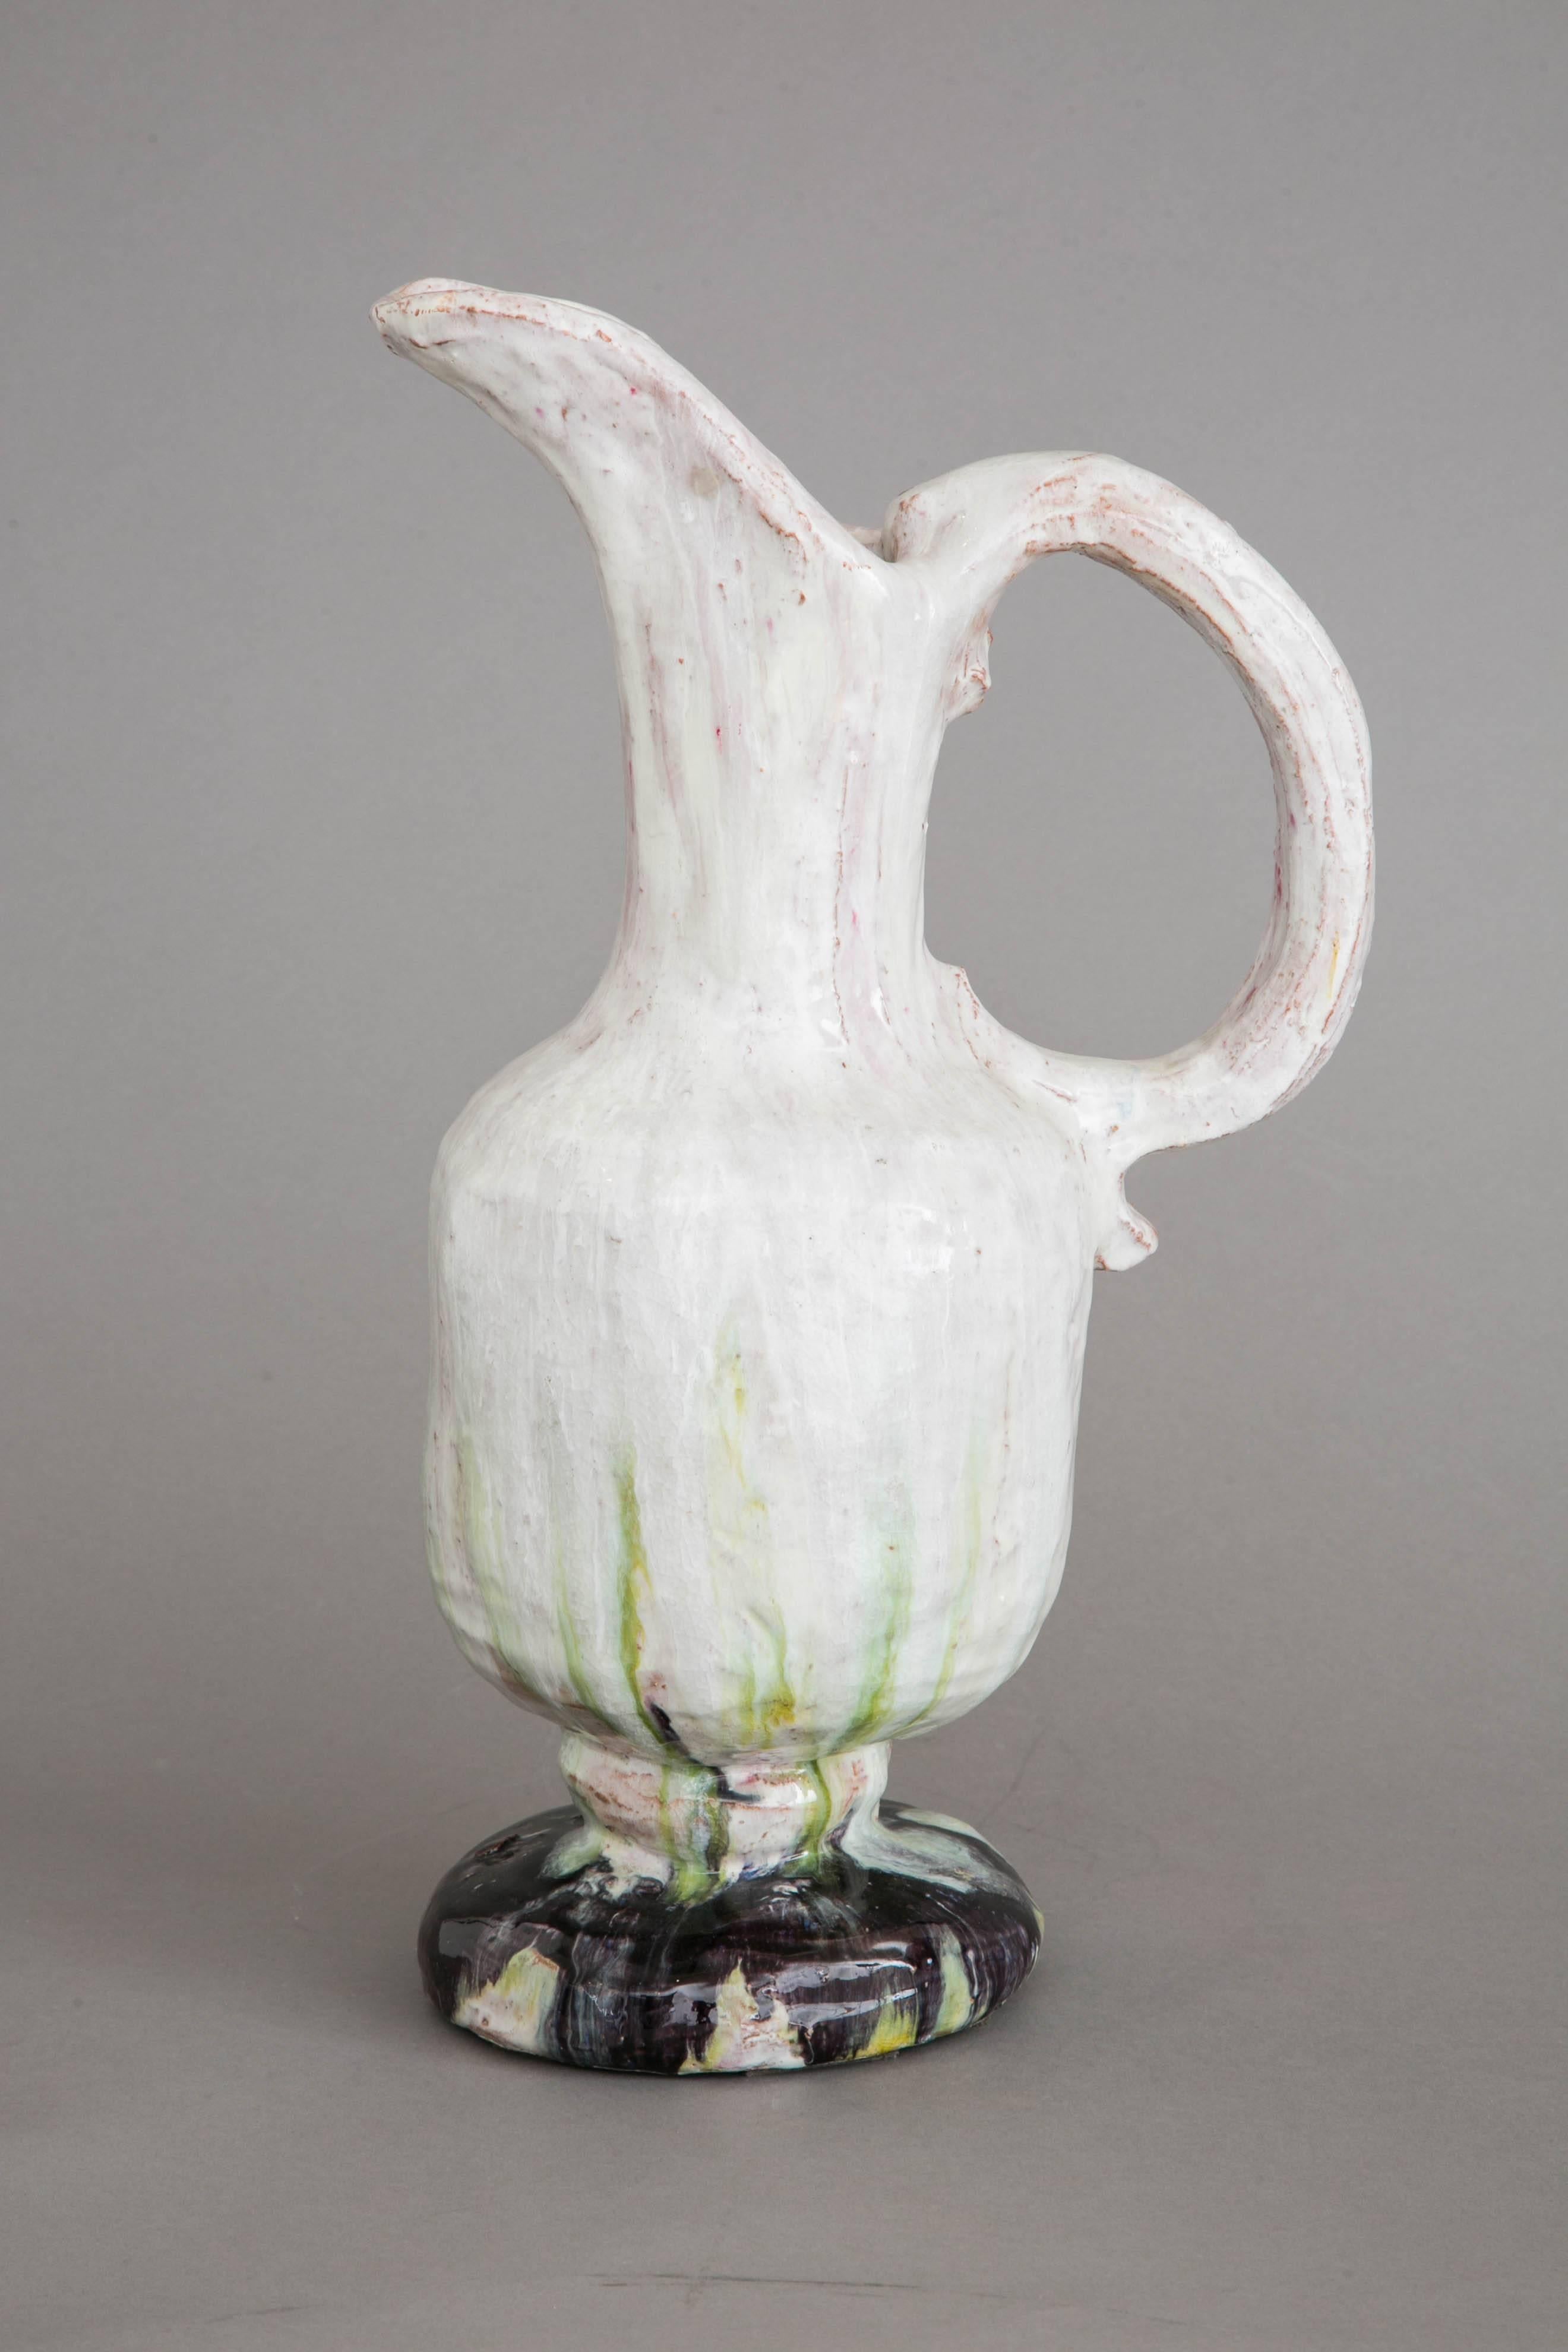 Elegant enameled stoneware ewer vase, with a large handle, 1950s, by Alice Colonieu (1924-2010).
Milky white and pink dropping enamel with green highlights, on a dark base.
Signed. 

Alice Colonieu (1924–2010) was a very original artist, working